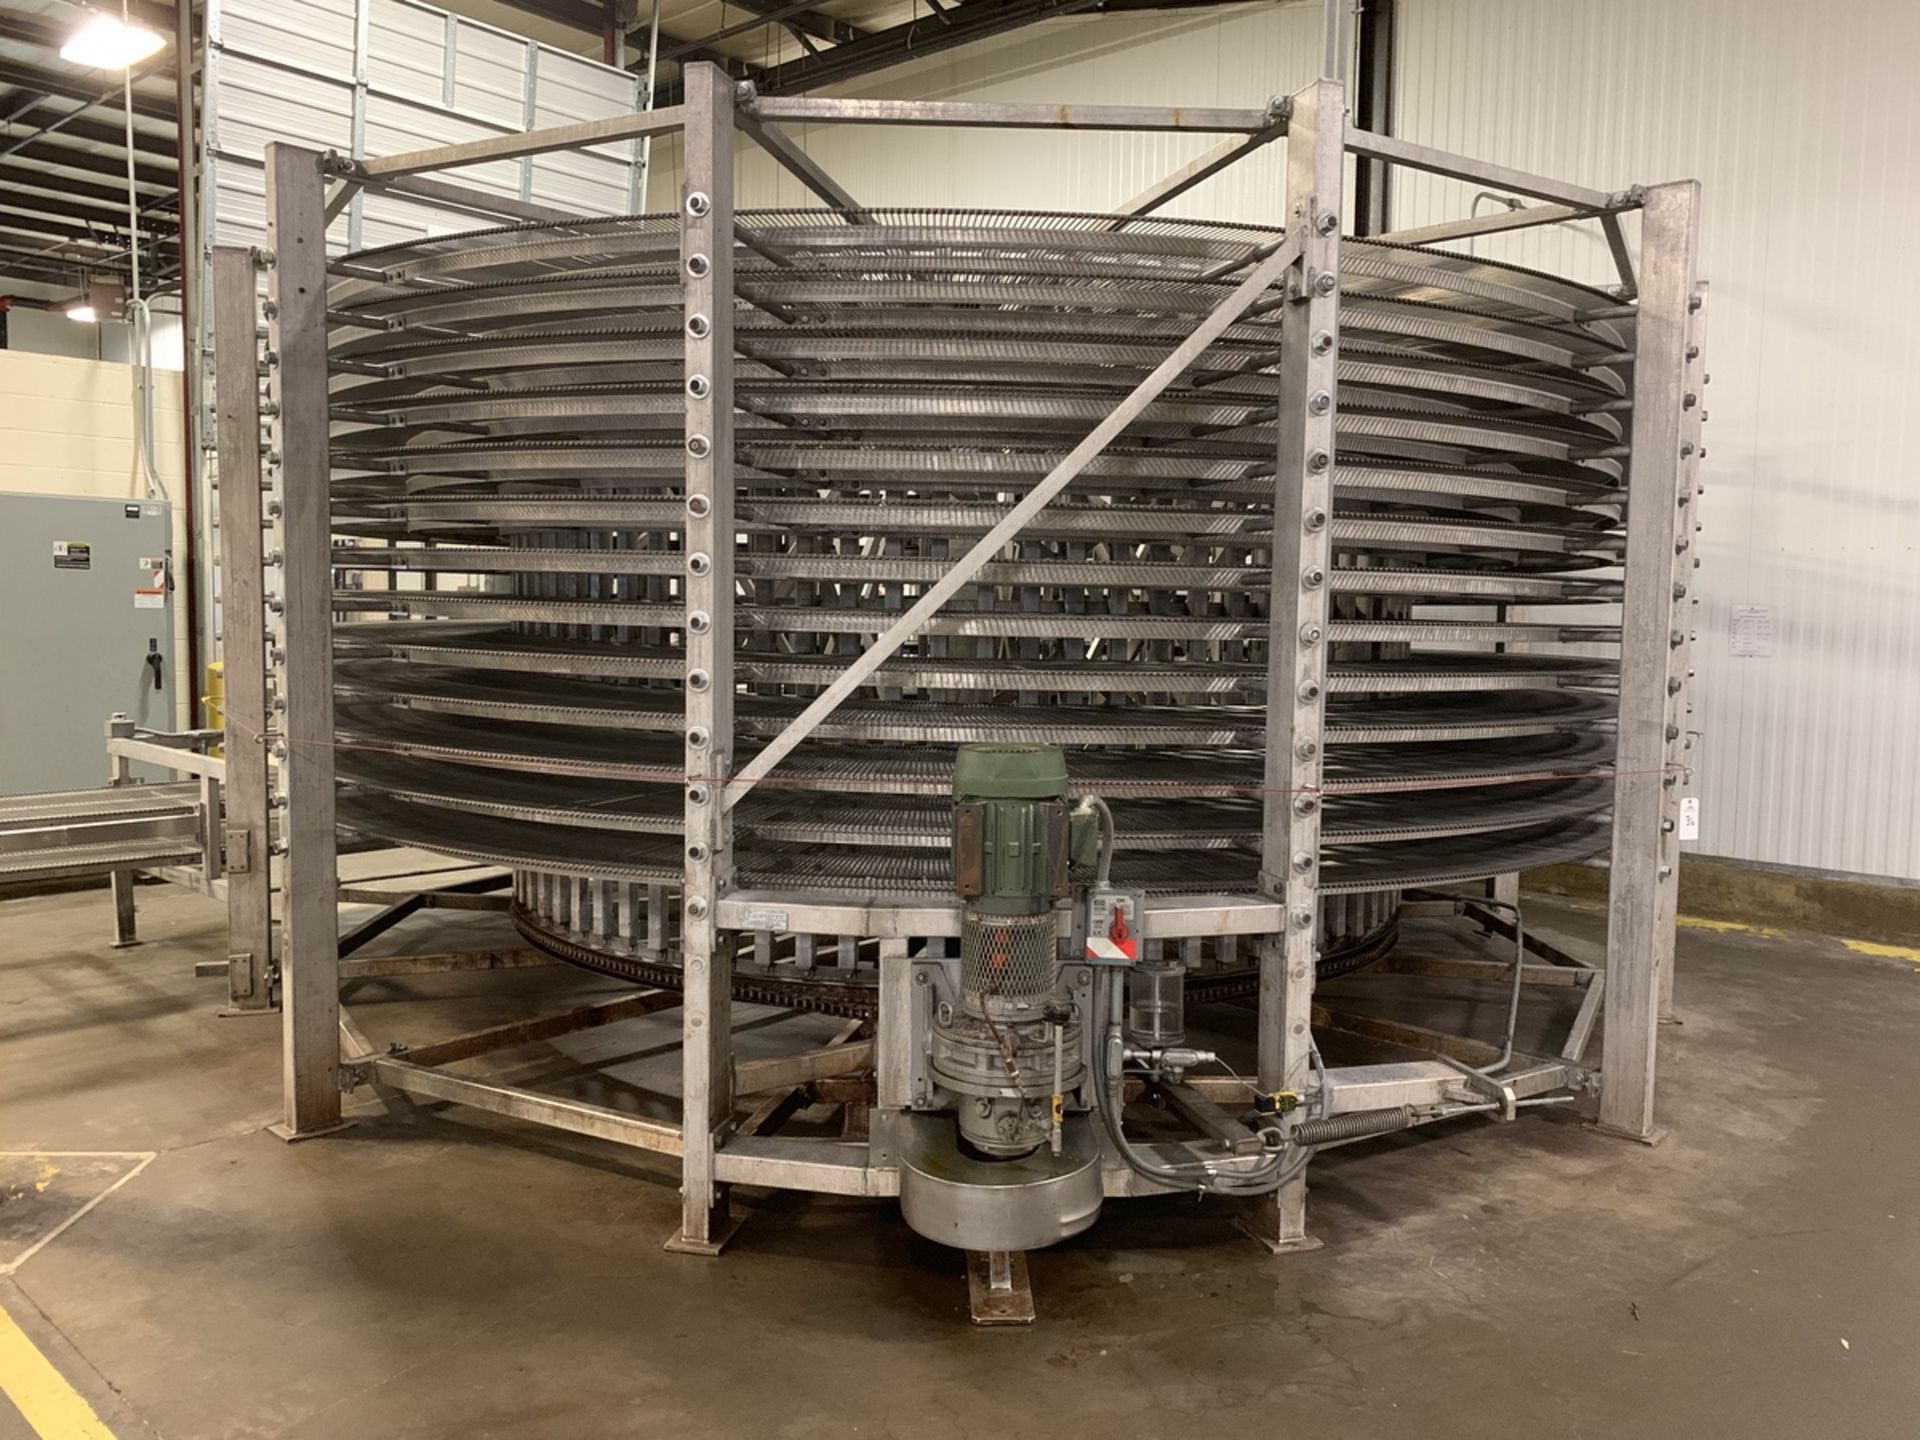 Stainless Steel Ambient Cooling Spiral with Infeed Conveyor, 36" Wide Belt, 14-Tier | Rig Fee: 6500 - Image 2 of 4